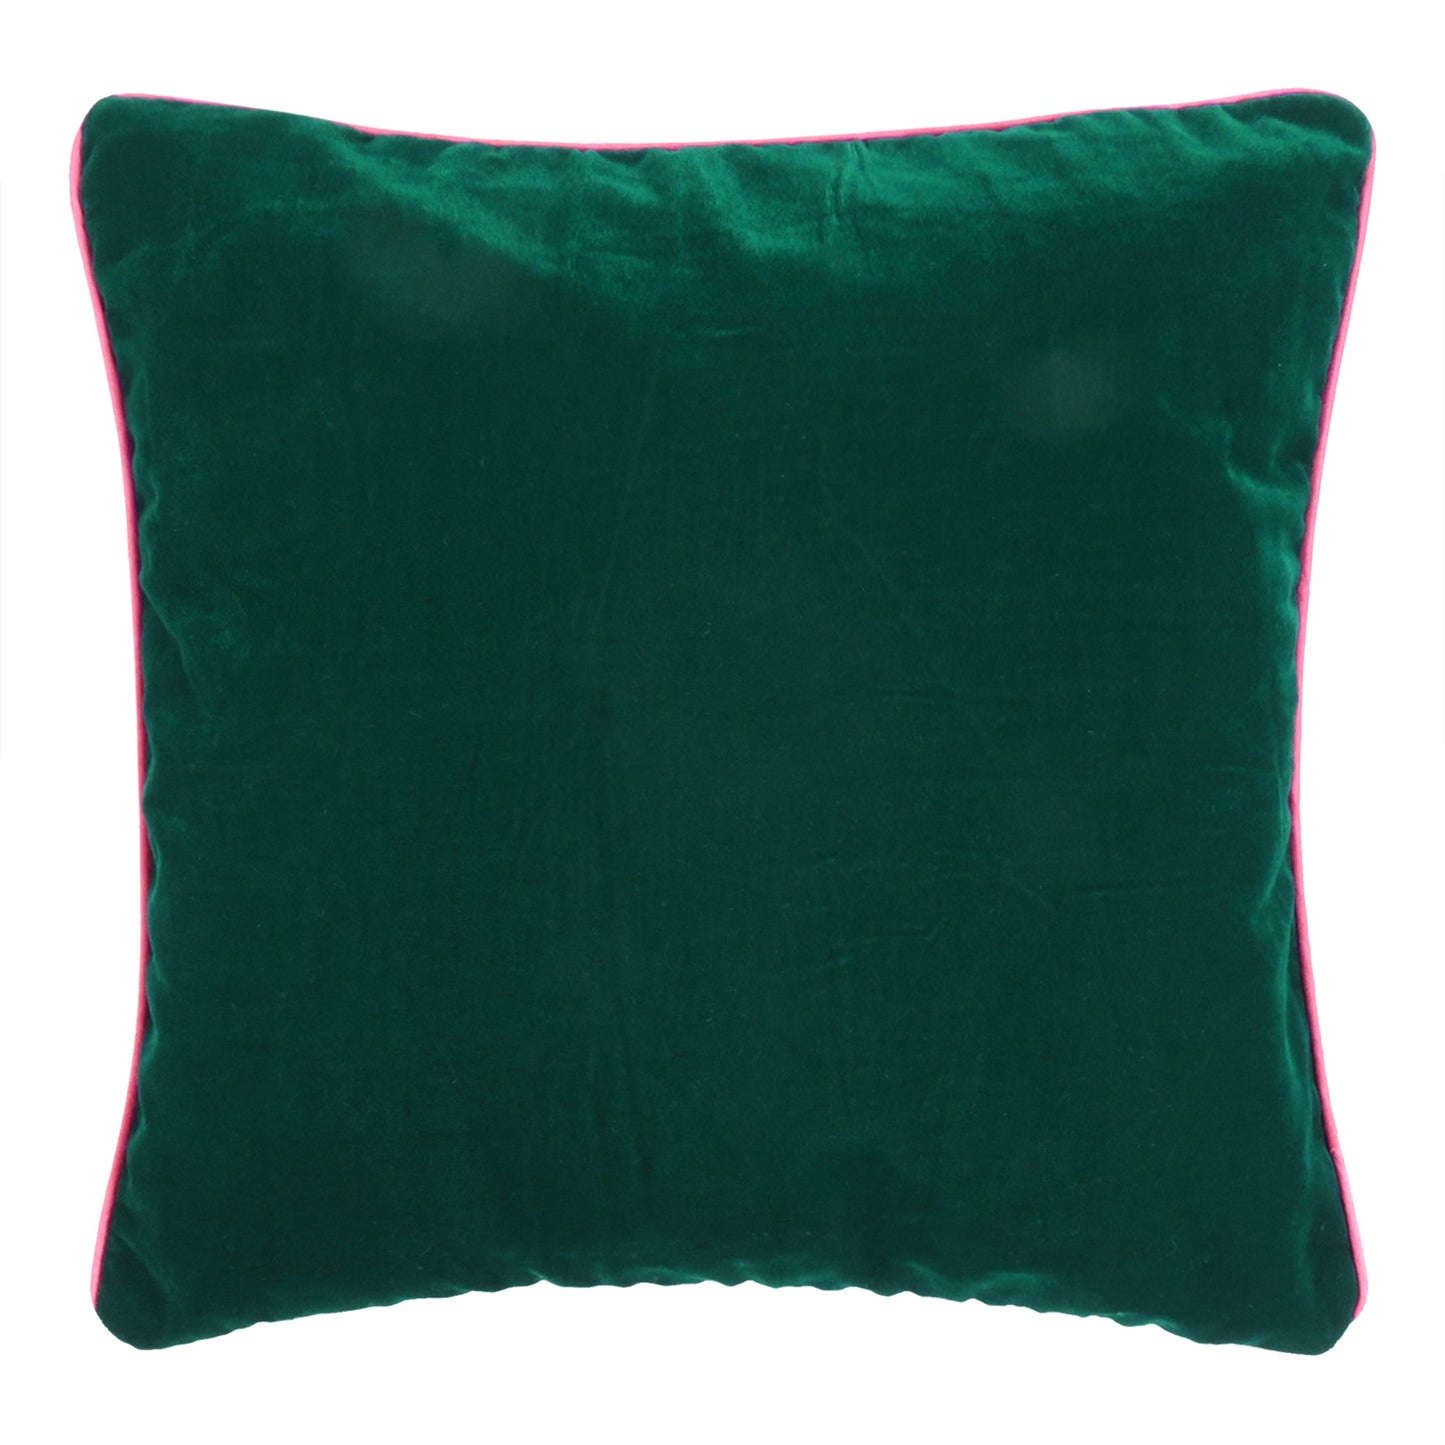 Bayberry Green Velvet Cushion Cover with Light Pink Piping Edge in Set of 2